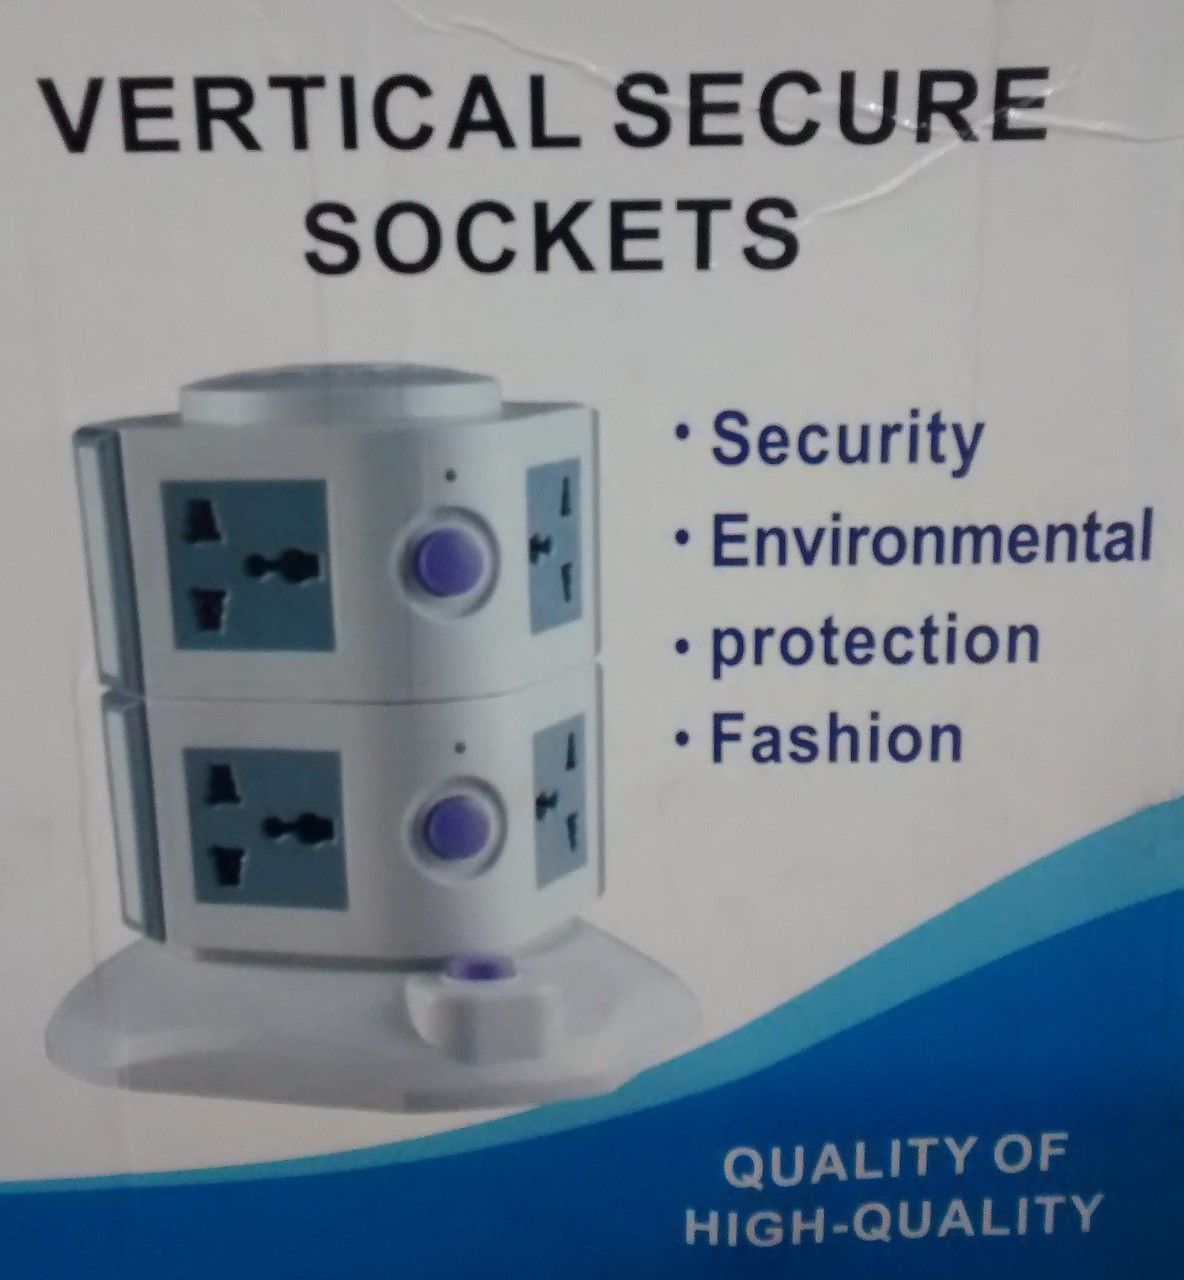 Security. Environmental. Protection. Quality of High-Quality